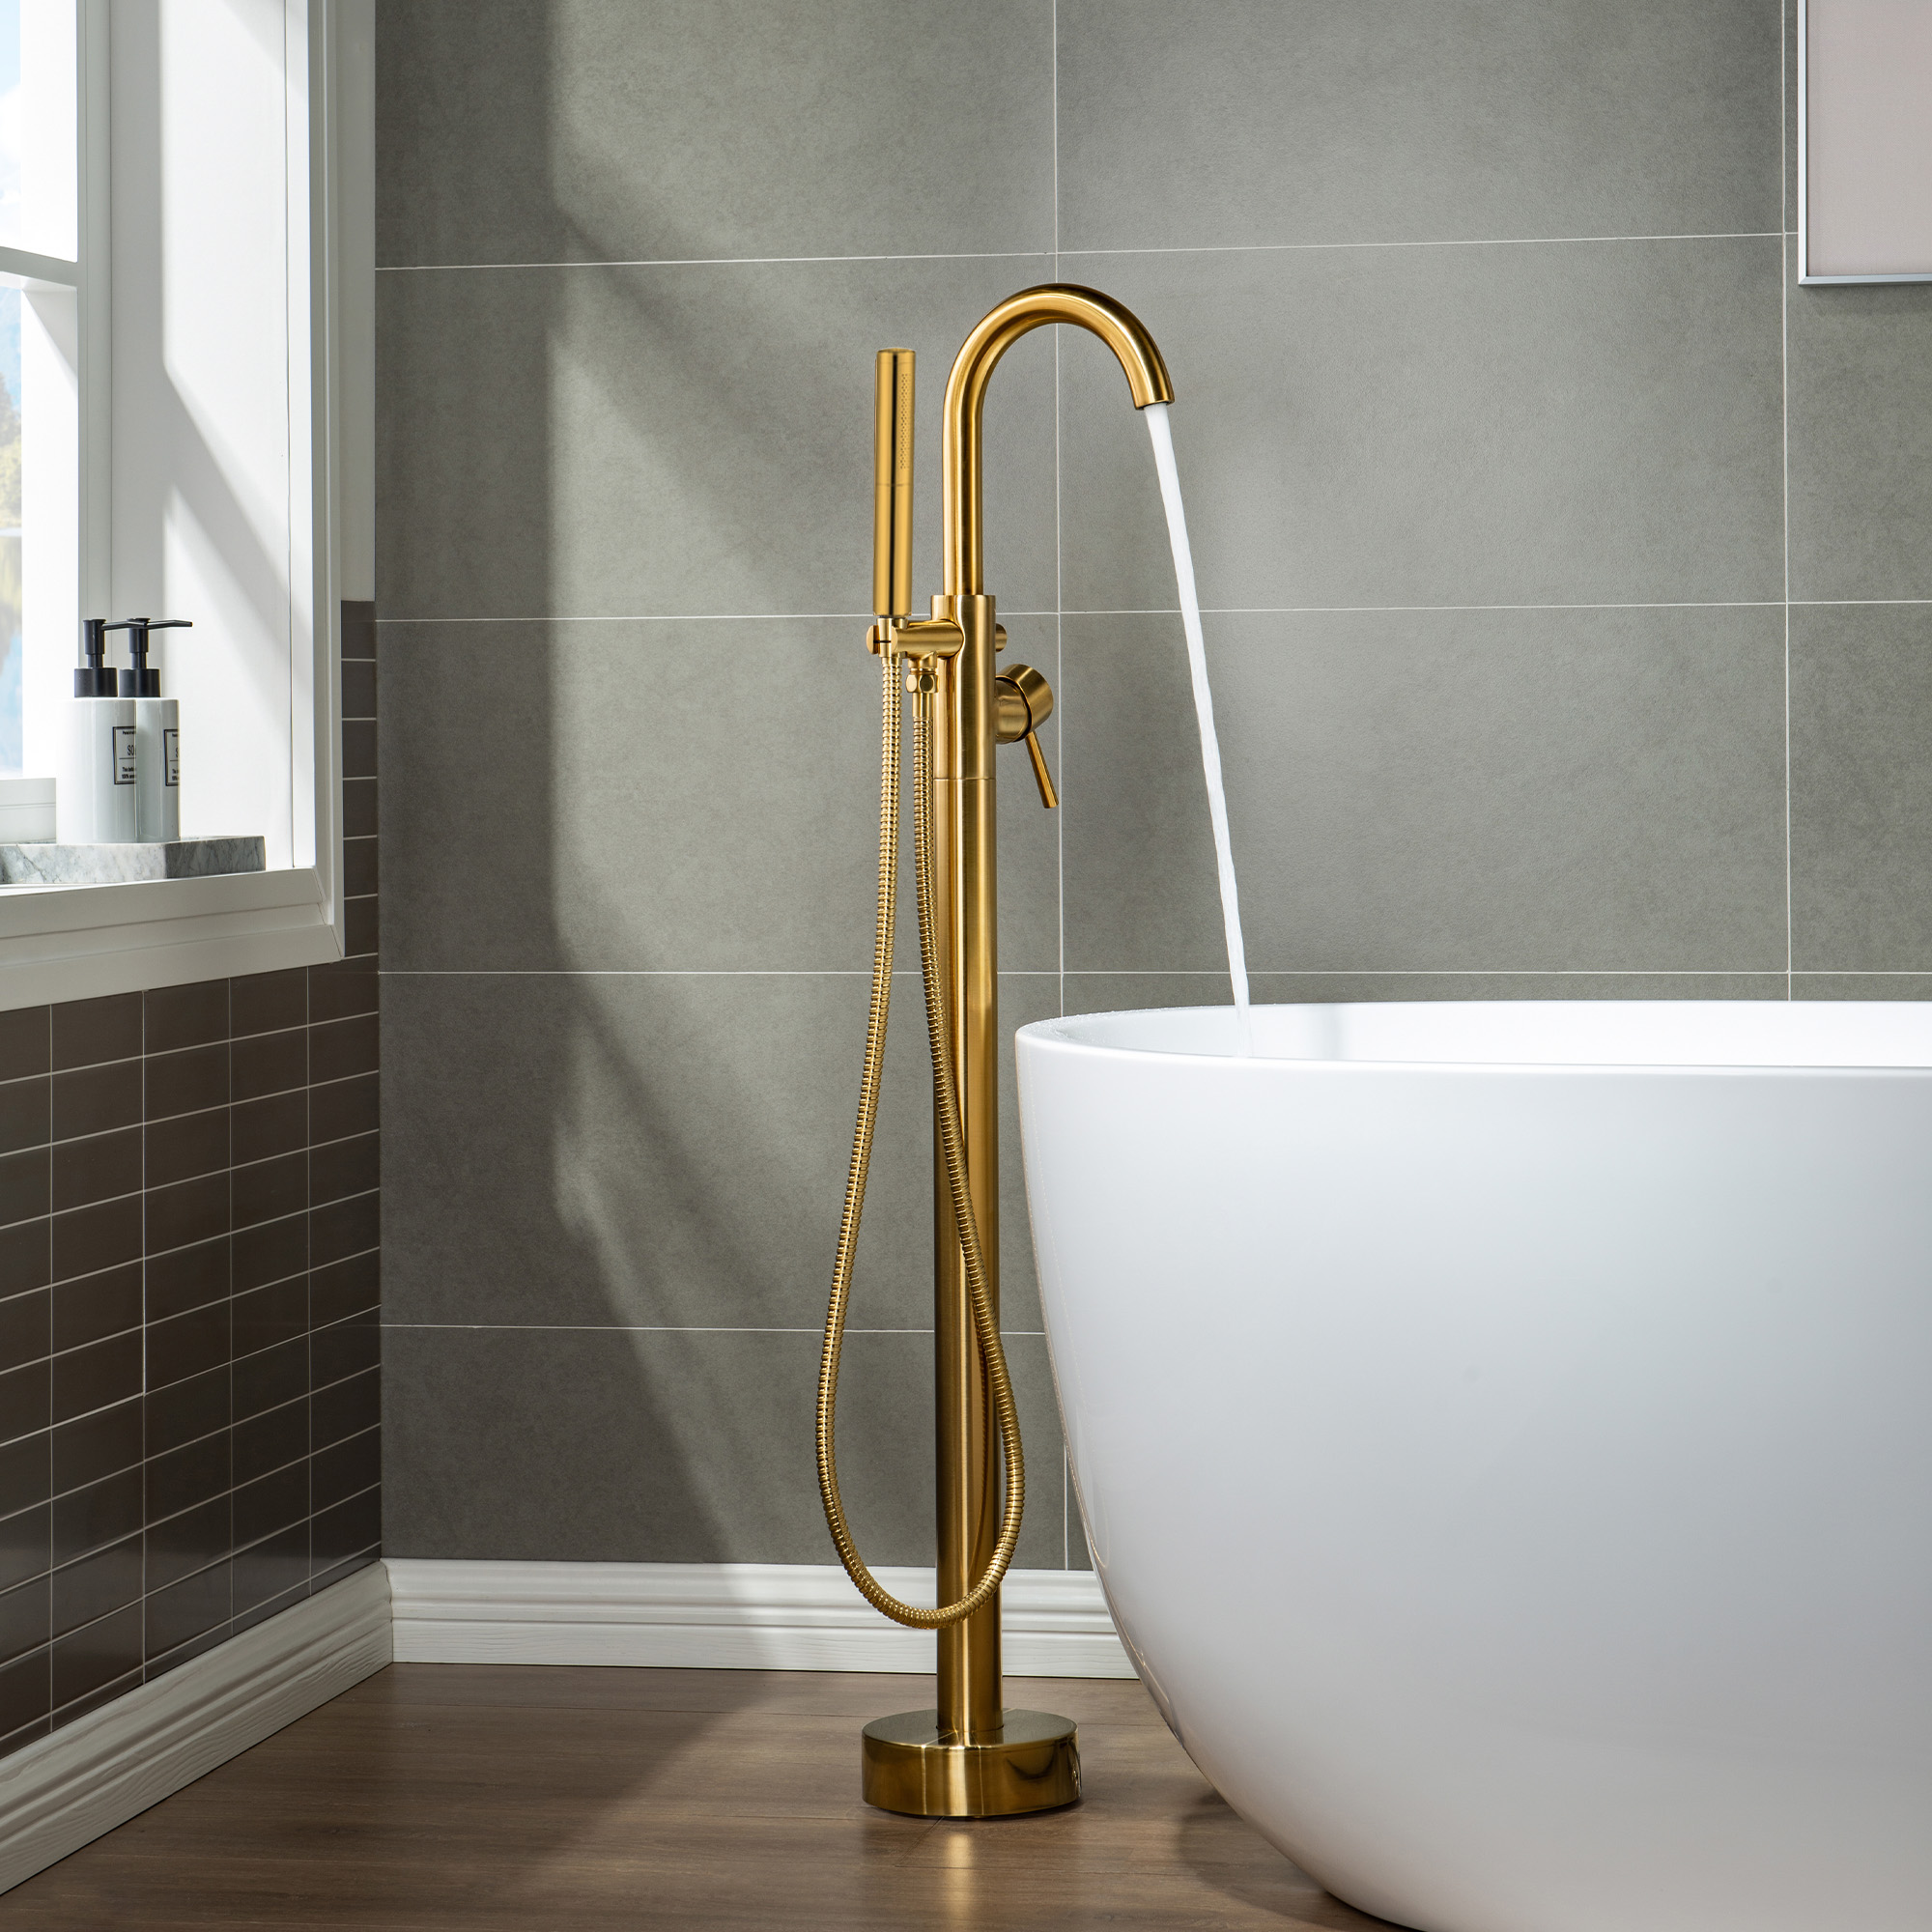  WOODBRIDGE F0007BGDR Contemporary Single Handle Floor Mount Freestanding Tub Filler Faucet with Hand shower in Brushed Gold Finish._14256